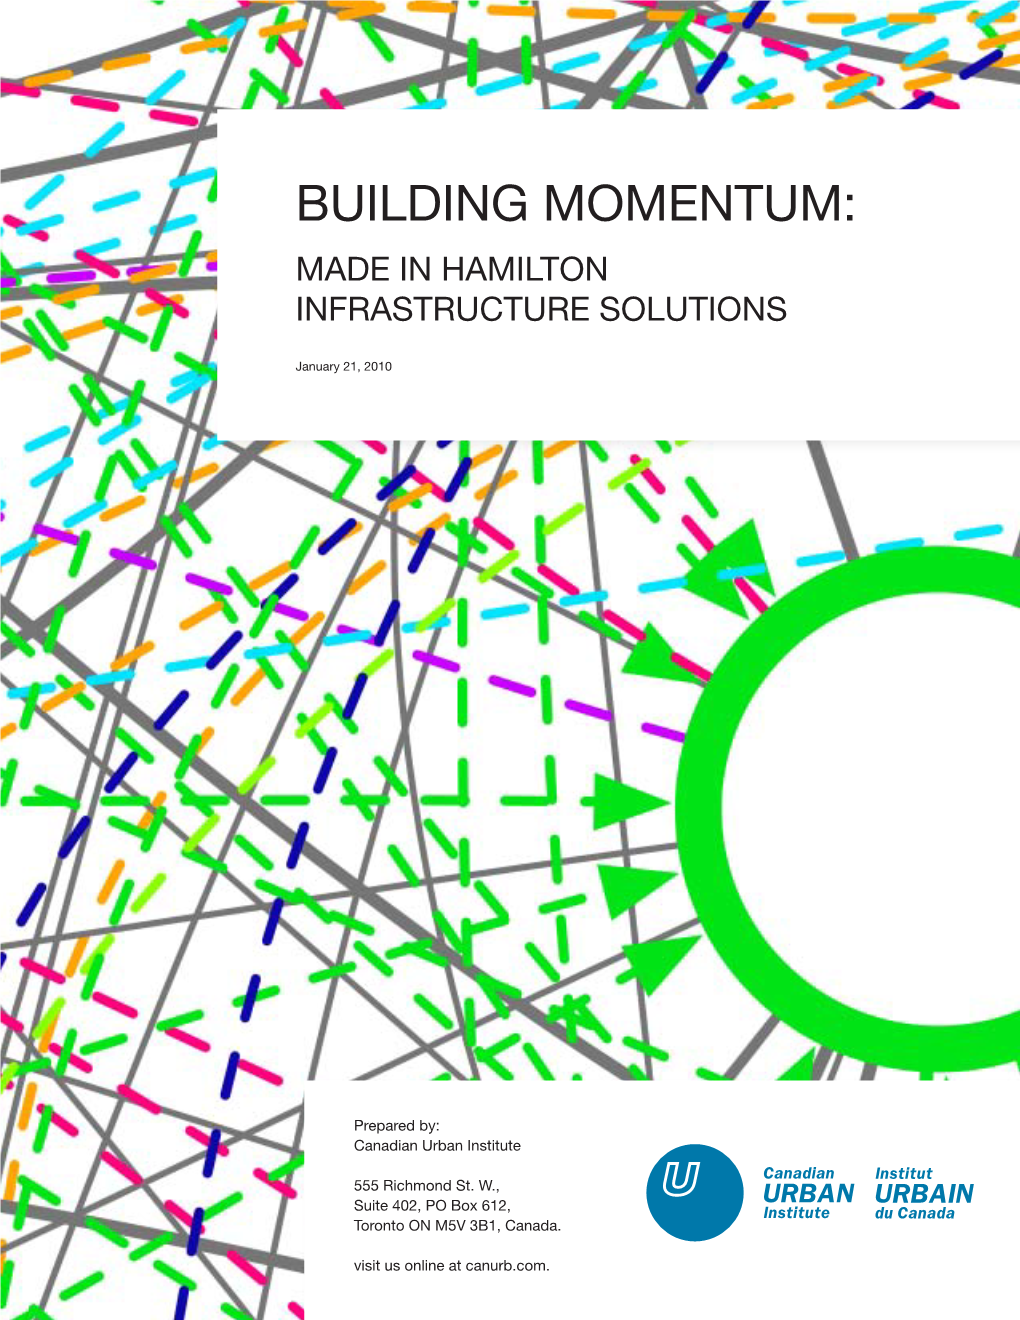 Building Momentum: Made in Hamilton Infrastructure Solutions